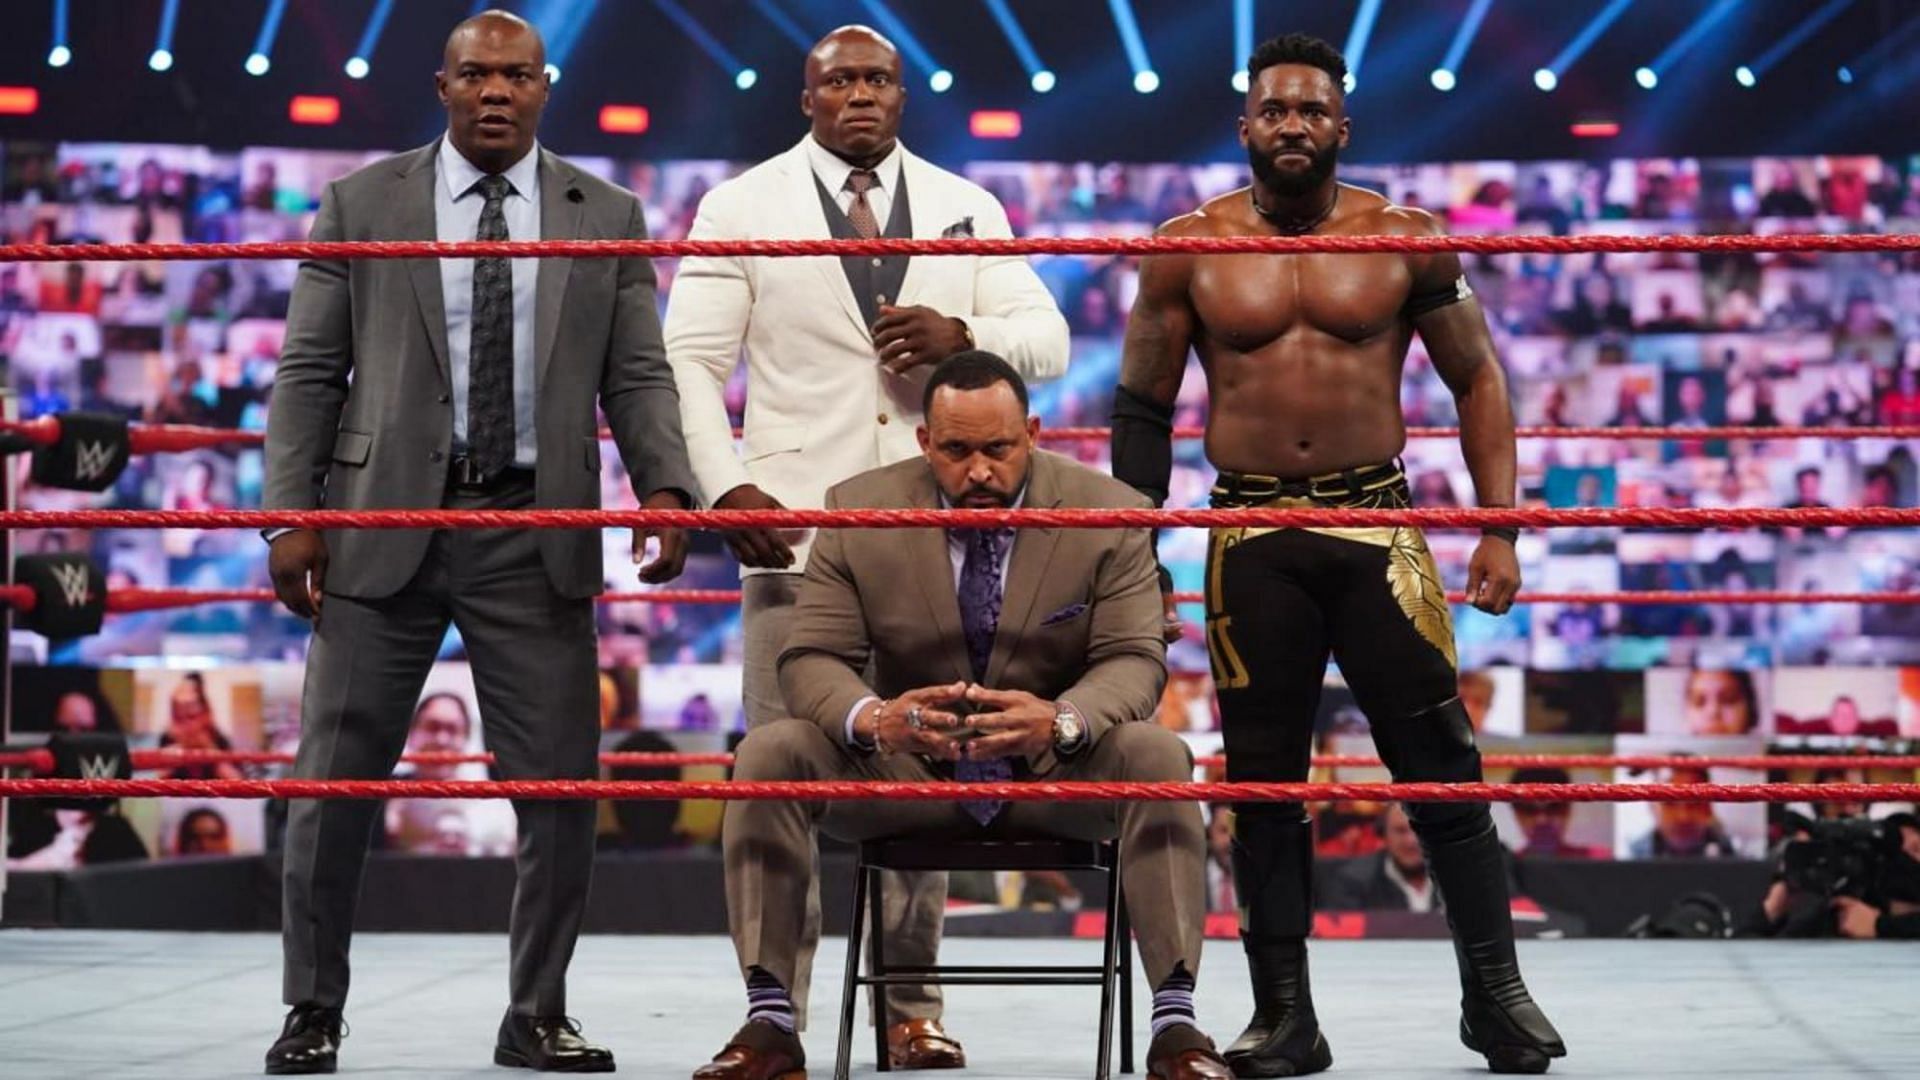 The Hurt Business was a dominant faction on RAW